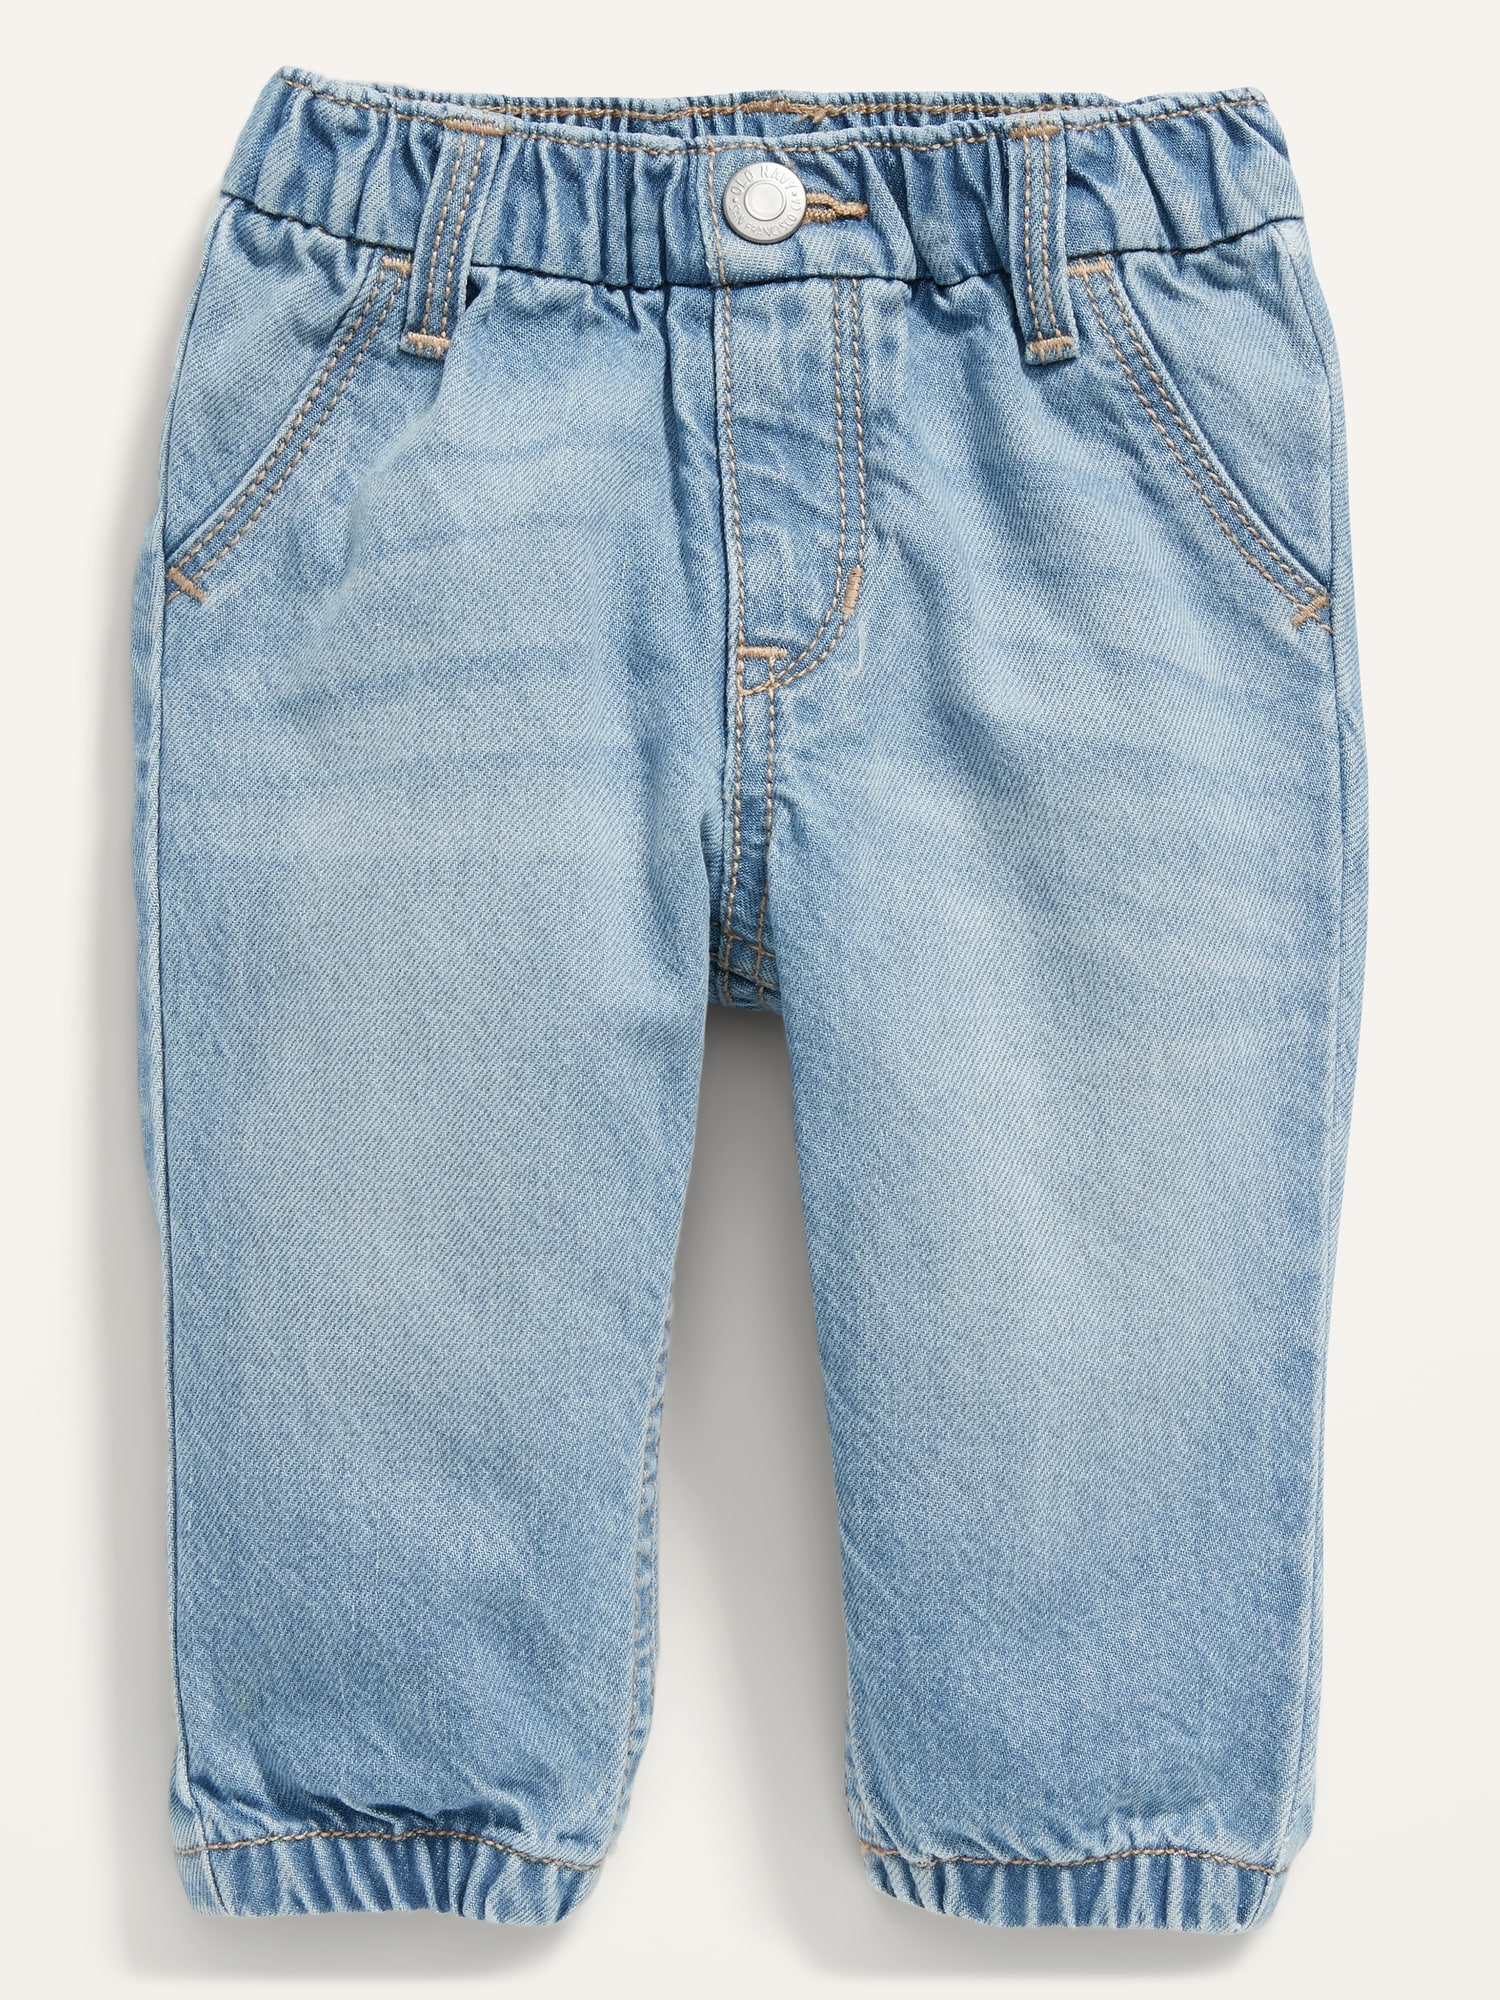 Unisex Soft Pull-On Jean Joggers for Baby